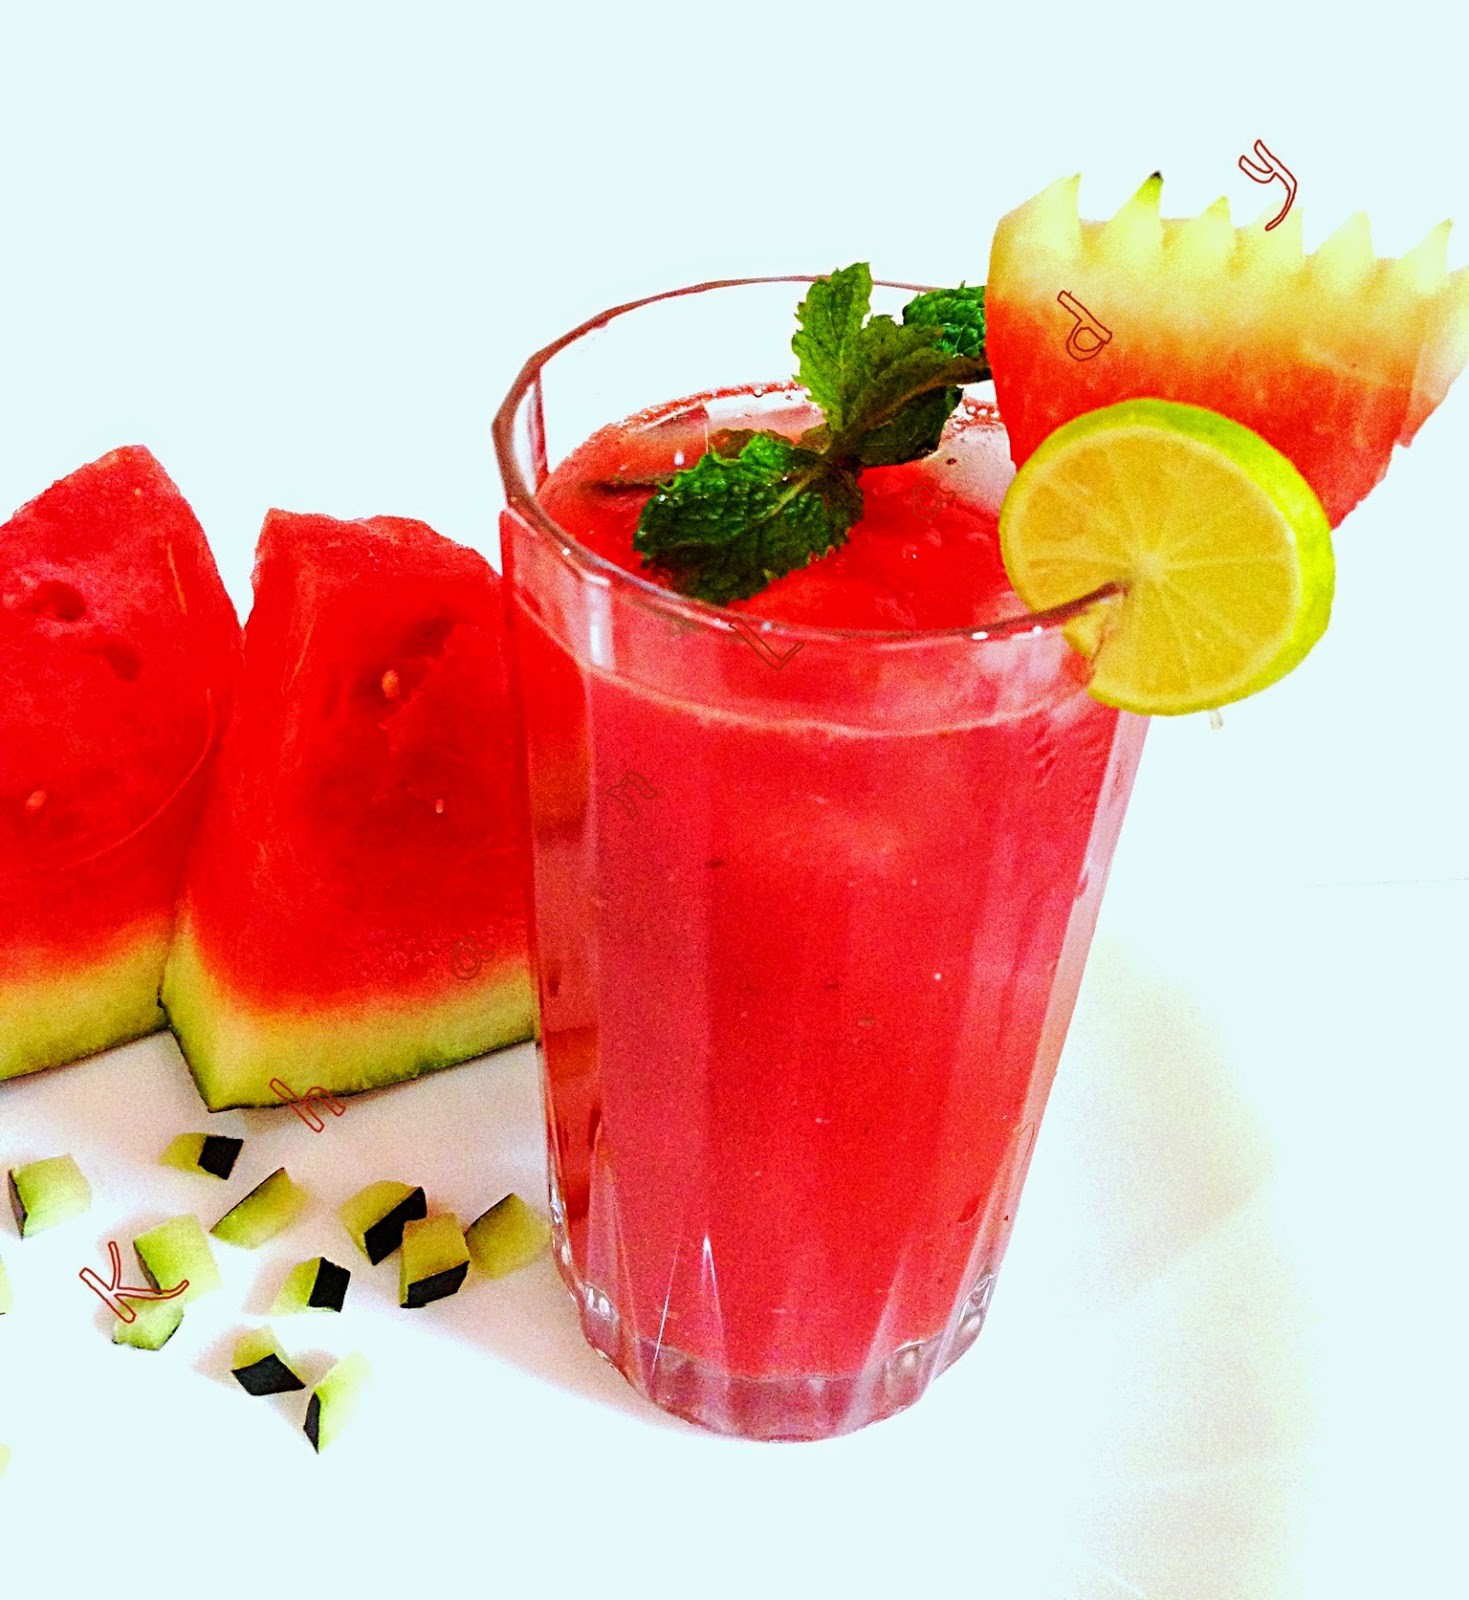 Simple Recipe To Make Watermelon Juice Step By Step In Serang City